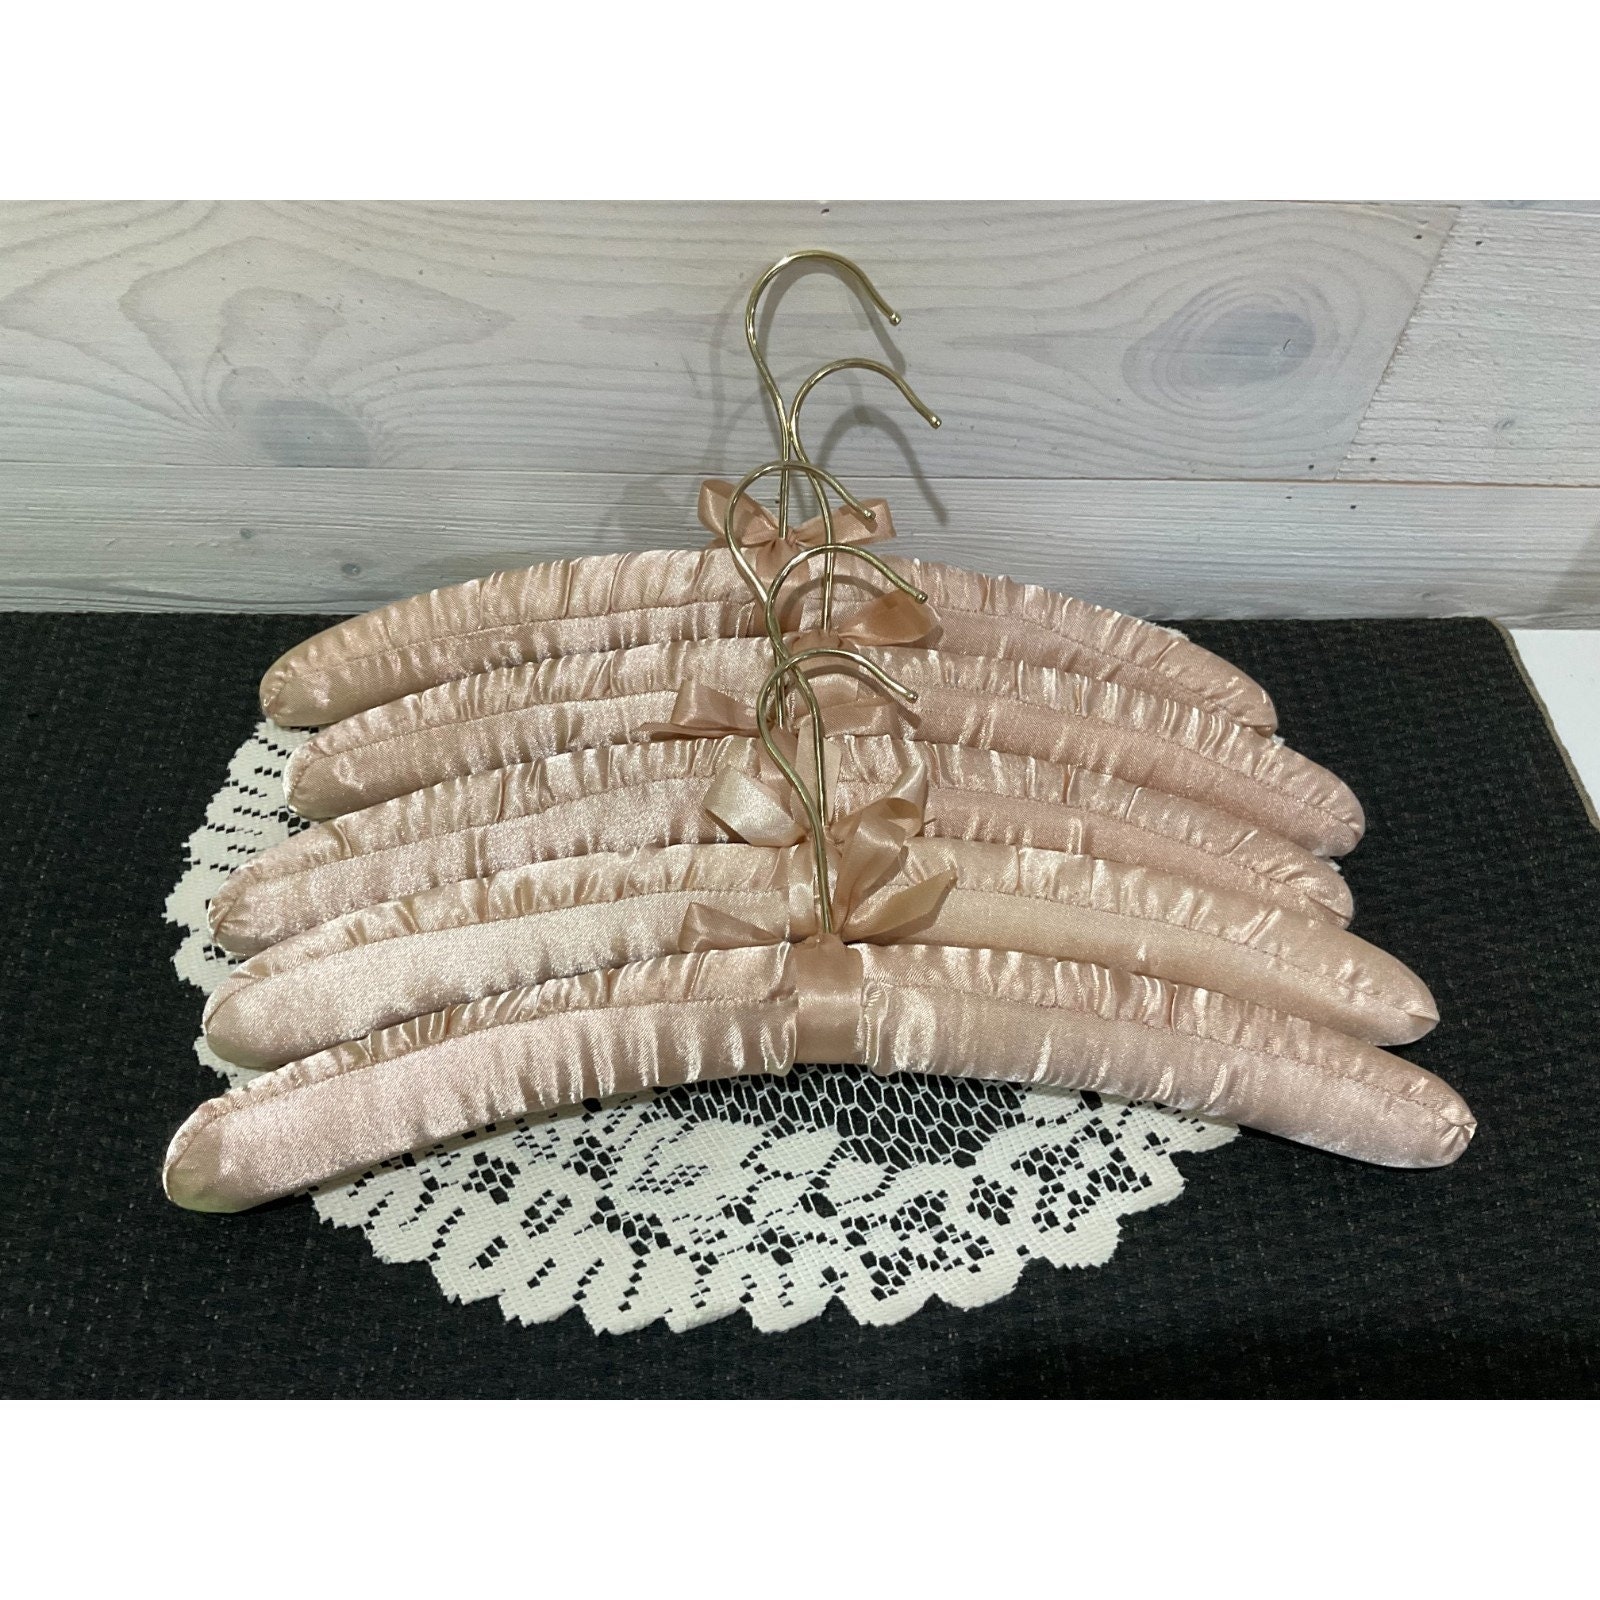 Vintage Padded Clothes Hangers Fabric-Bridal/Boudoir/Lingerie/Sweater Set  of 5